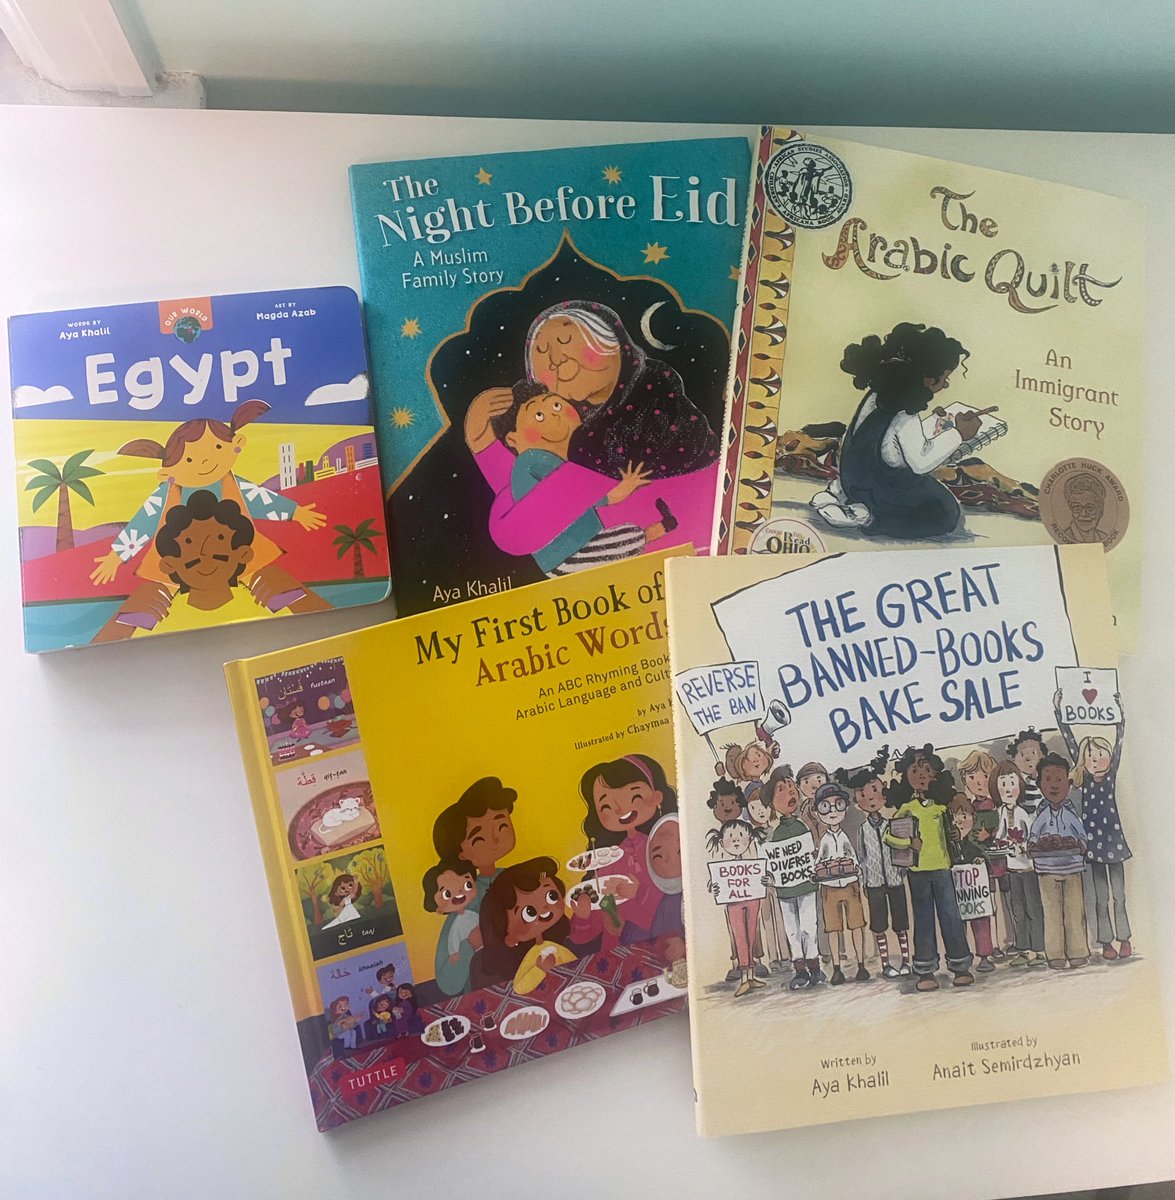 🎉GIVEAWAY!! 🎉 In honor of my latest picture book release, I’m giving away a whole set of my published books! Just follow me and retweet! If you’re an educator or librarian make sure to comment for a bonus entry. US only